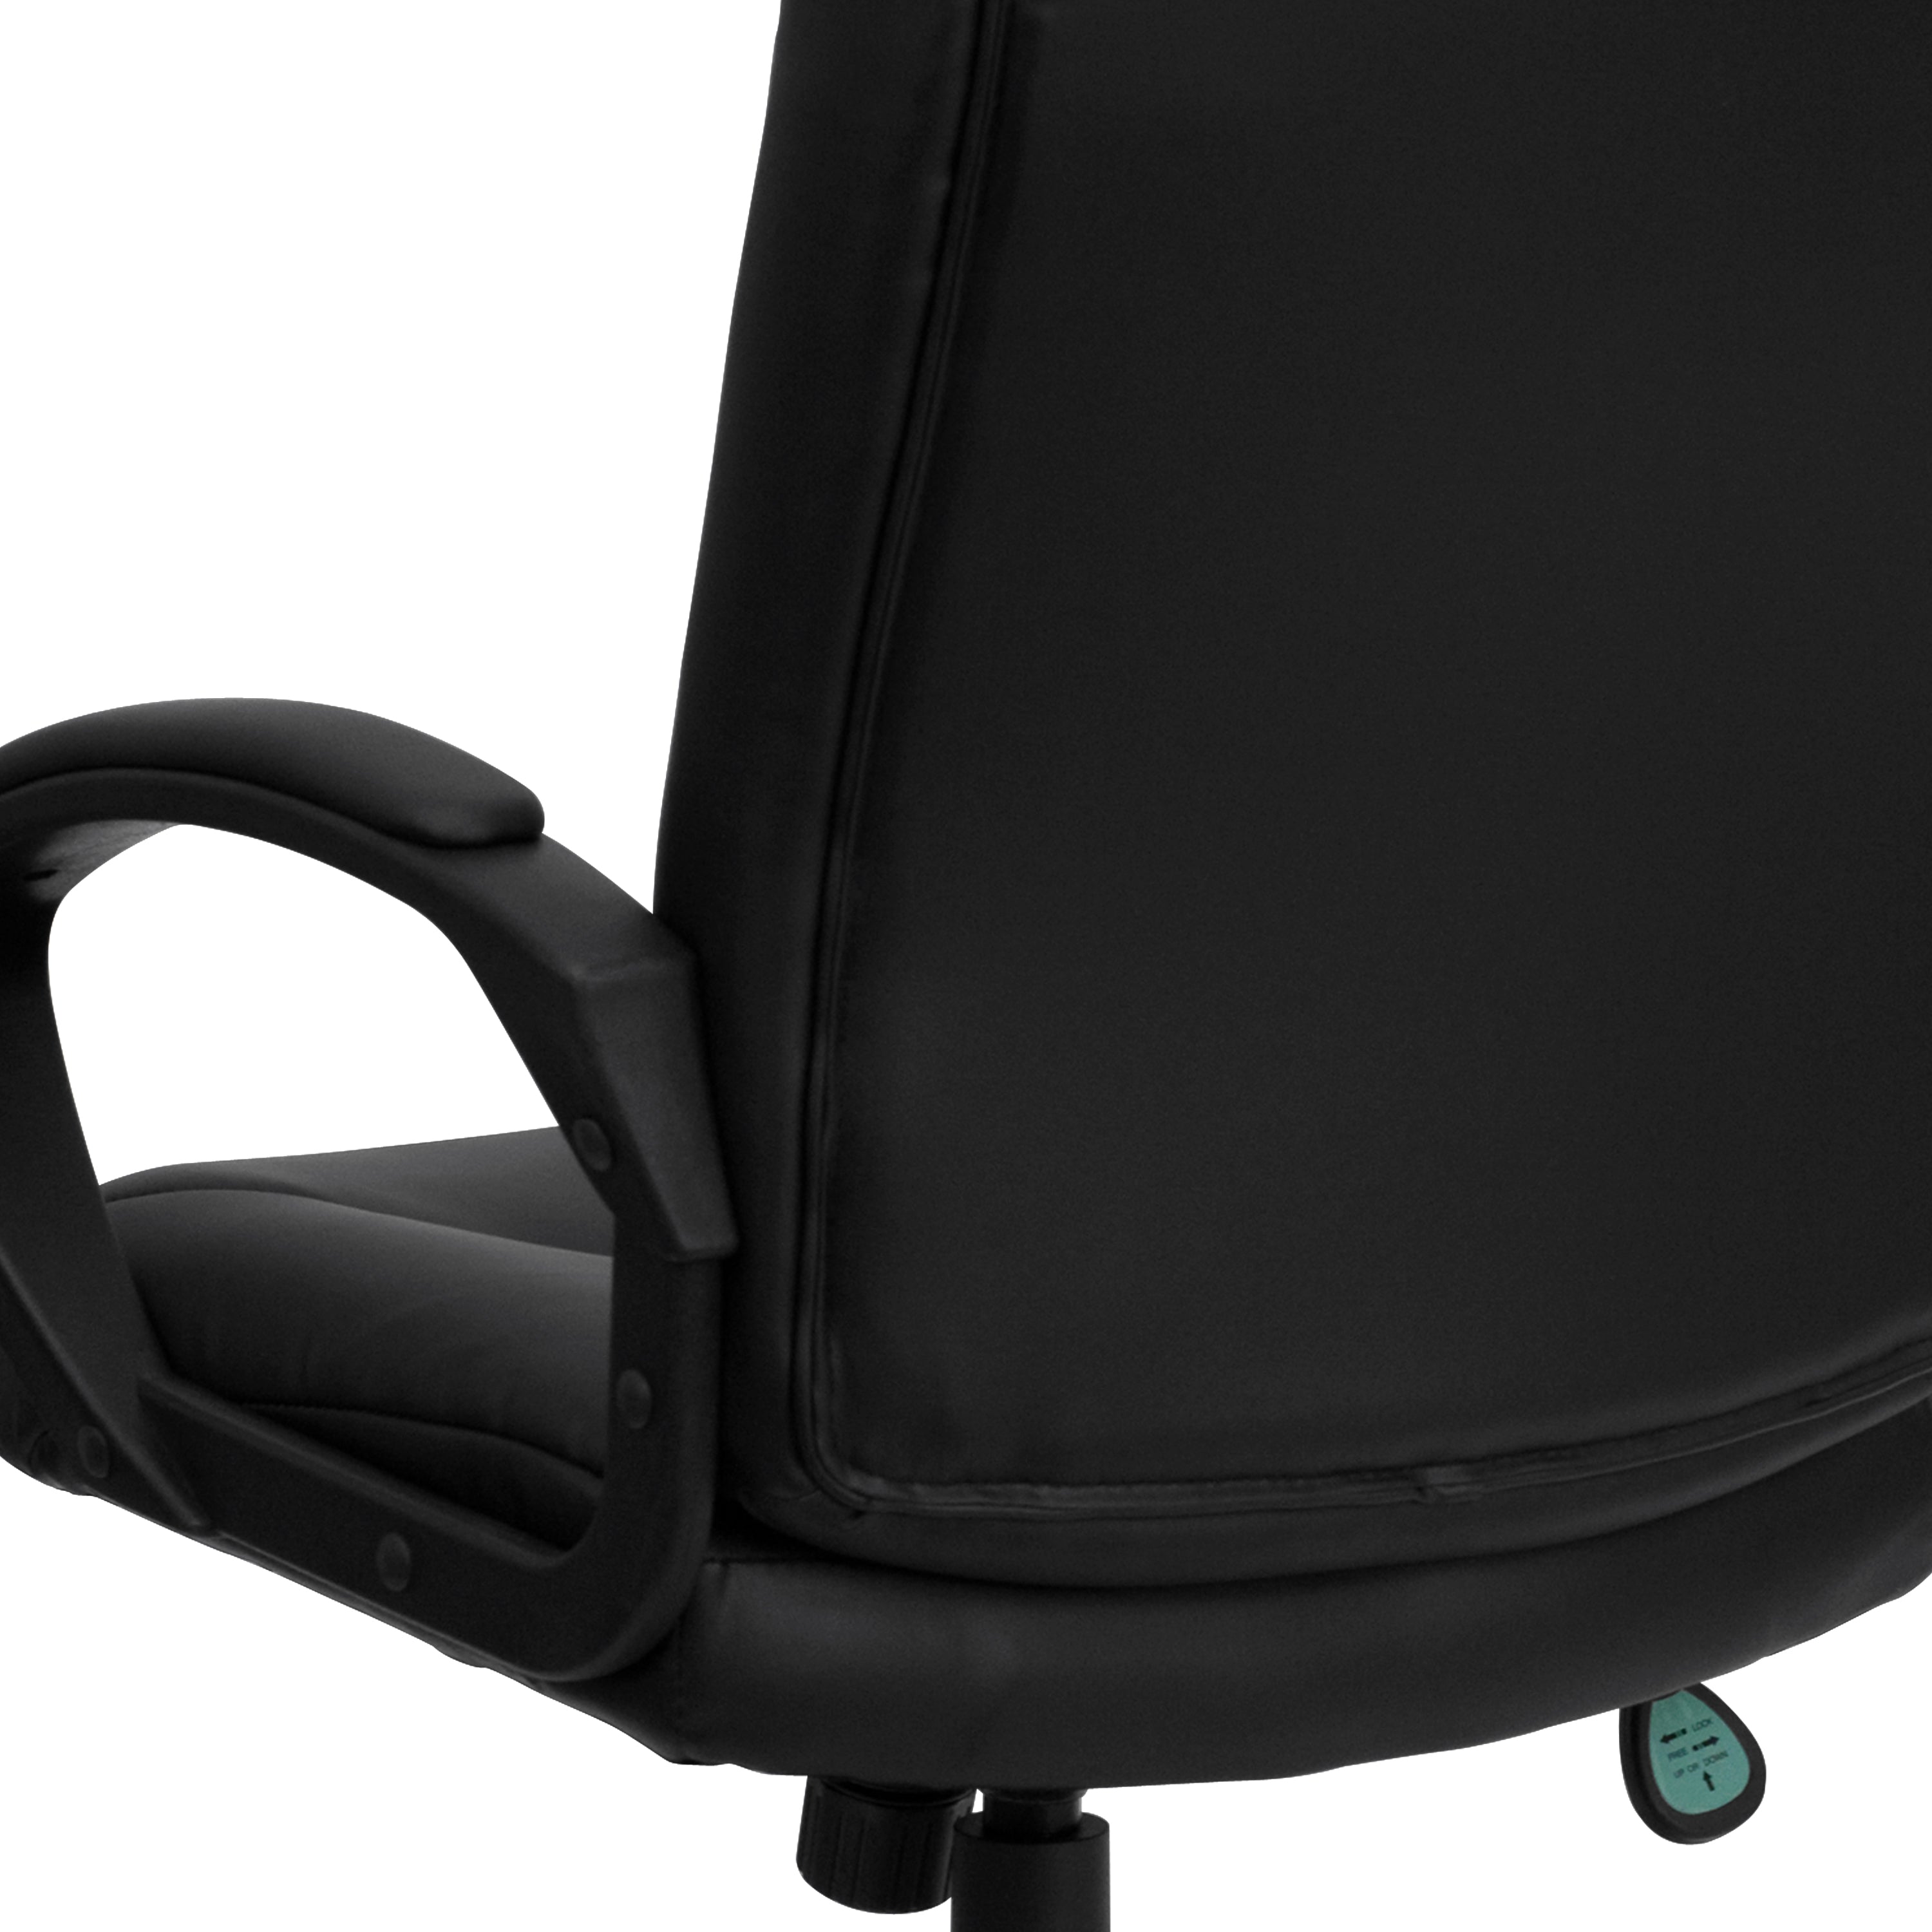 Mid-Back Fabric Executive Swivel Office Chair with Three Line Horizontal Stitch Back and Arms-Office Chair-Flash Furniture-Wall2Wall Furnishings